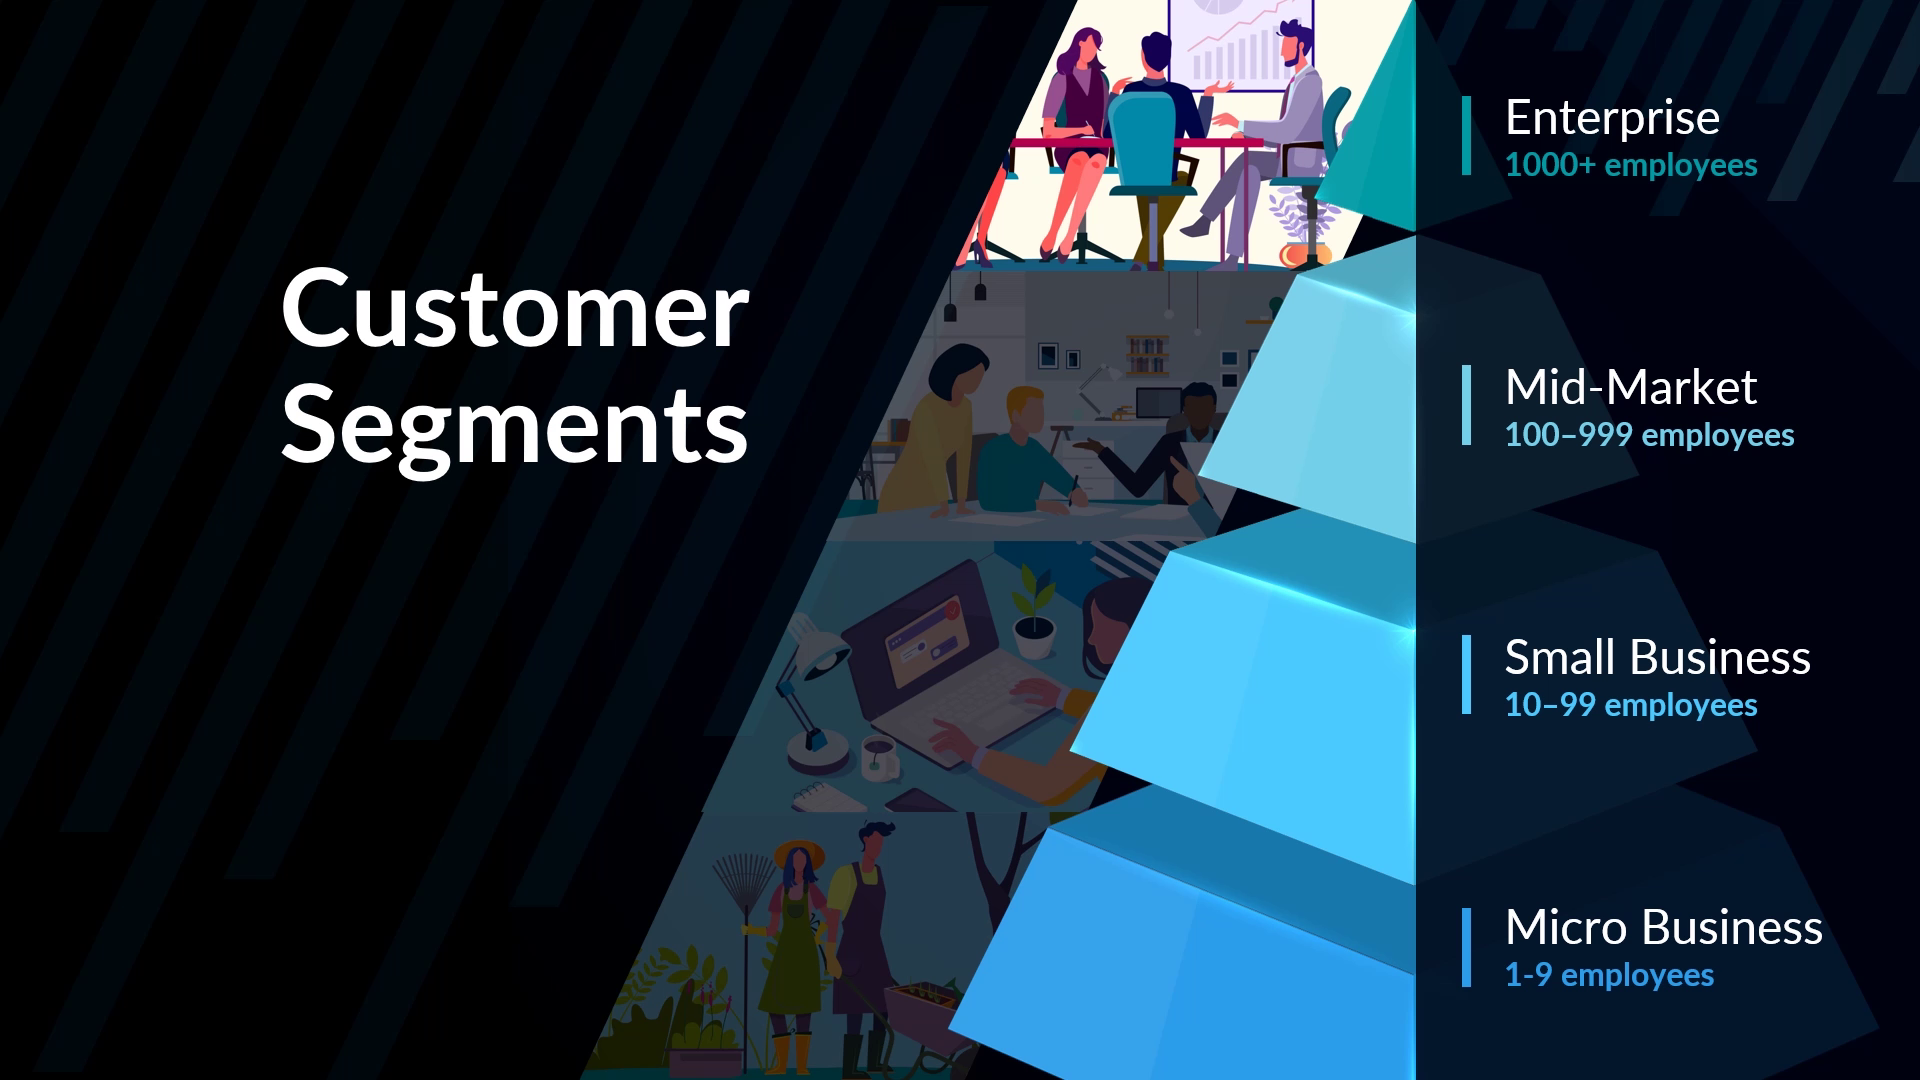 Customer Segments PowerPoint slide listing "Enterprise, Mid Market, Small Business and Micro Business"